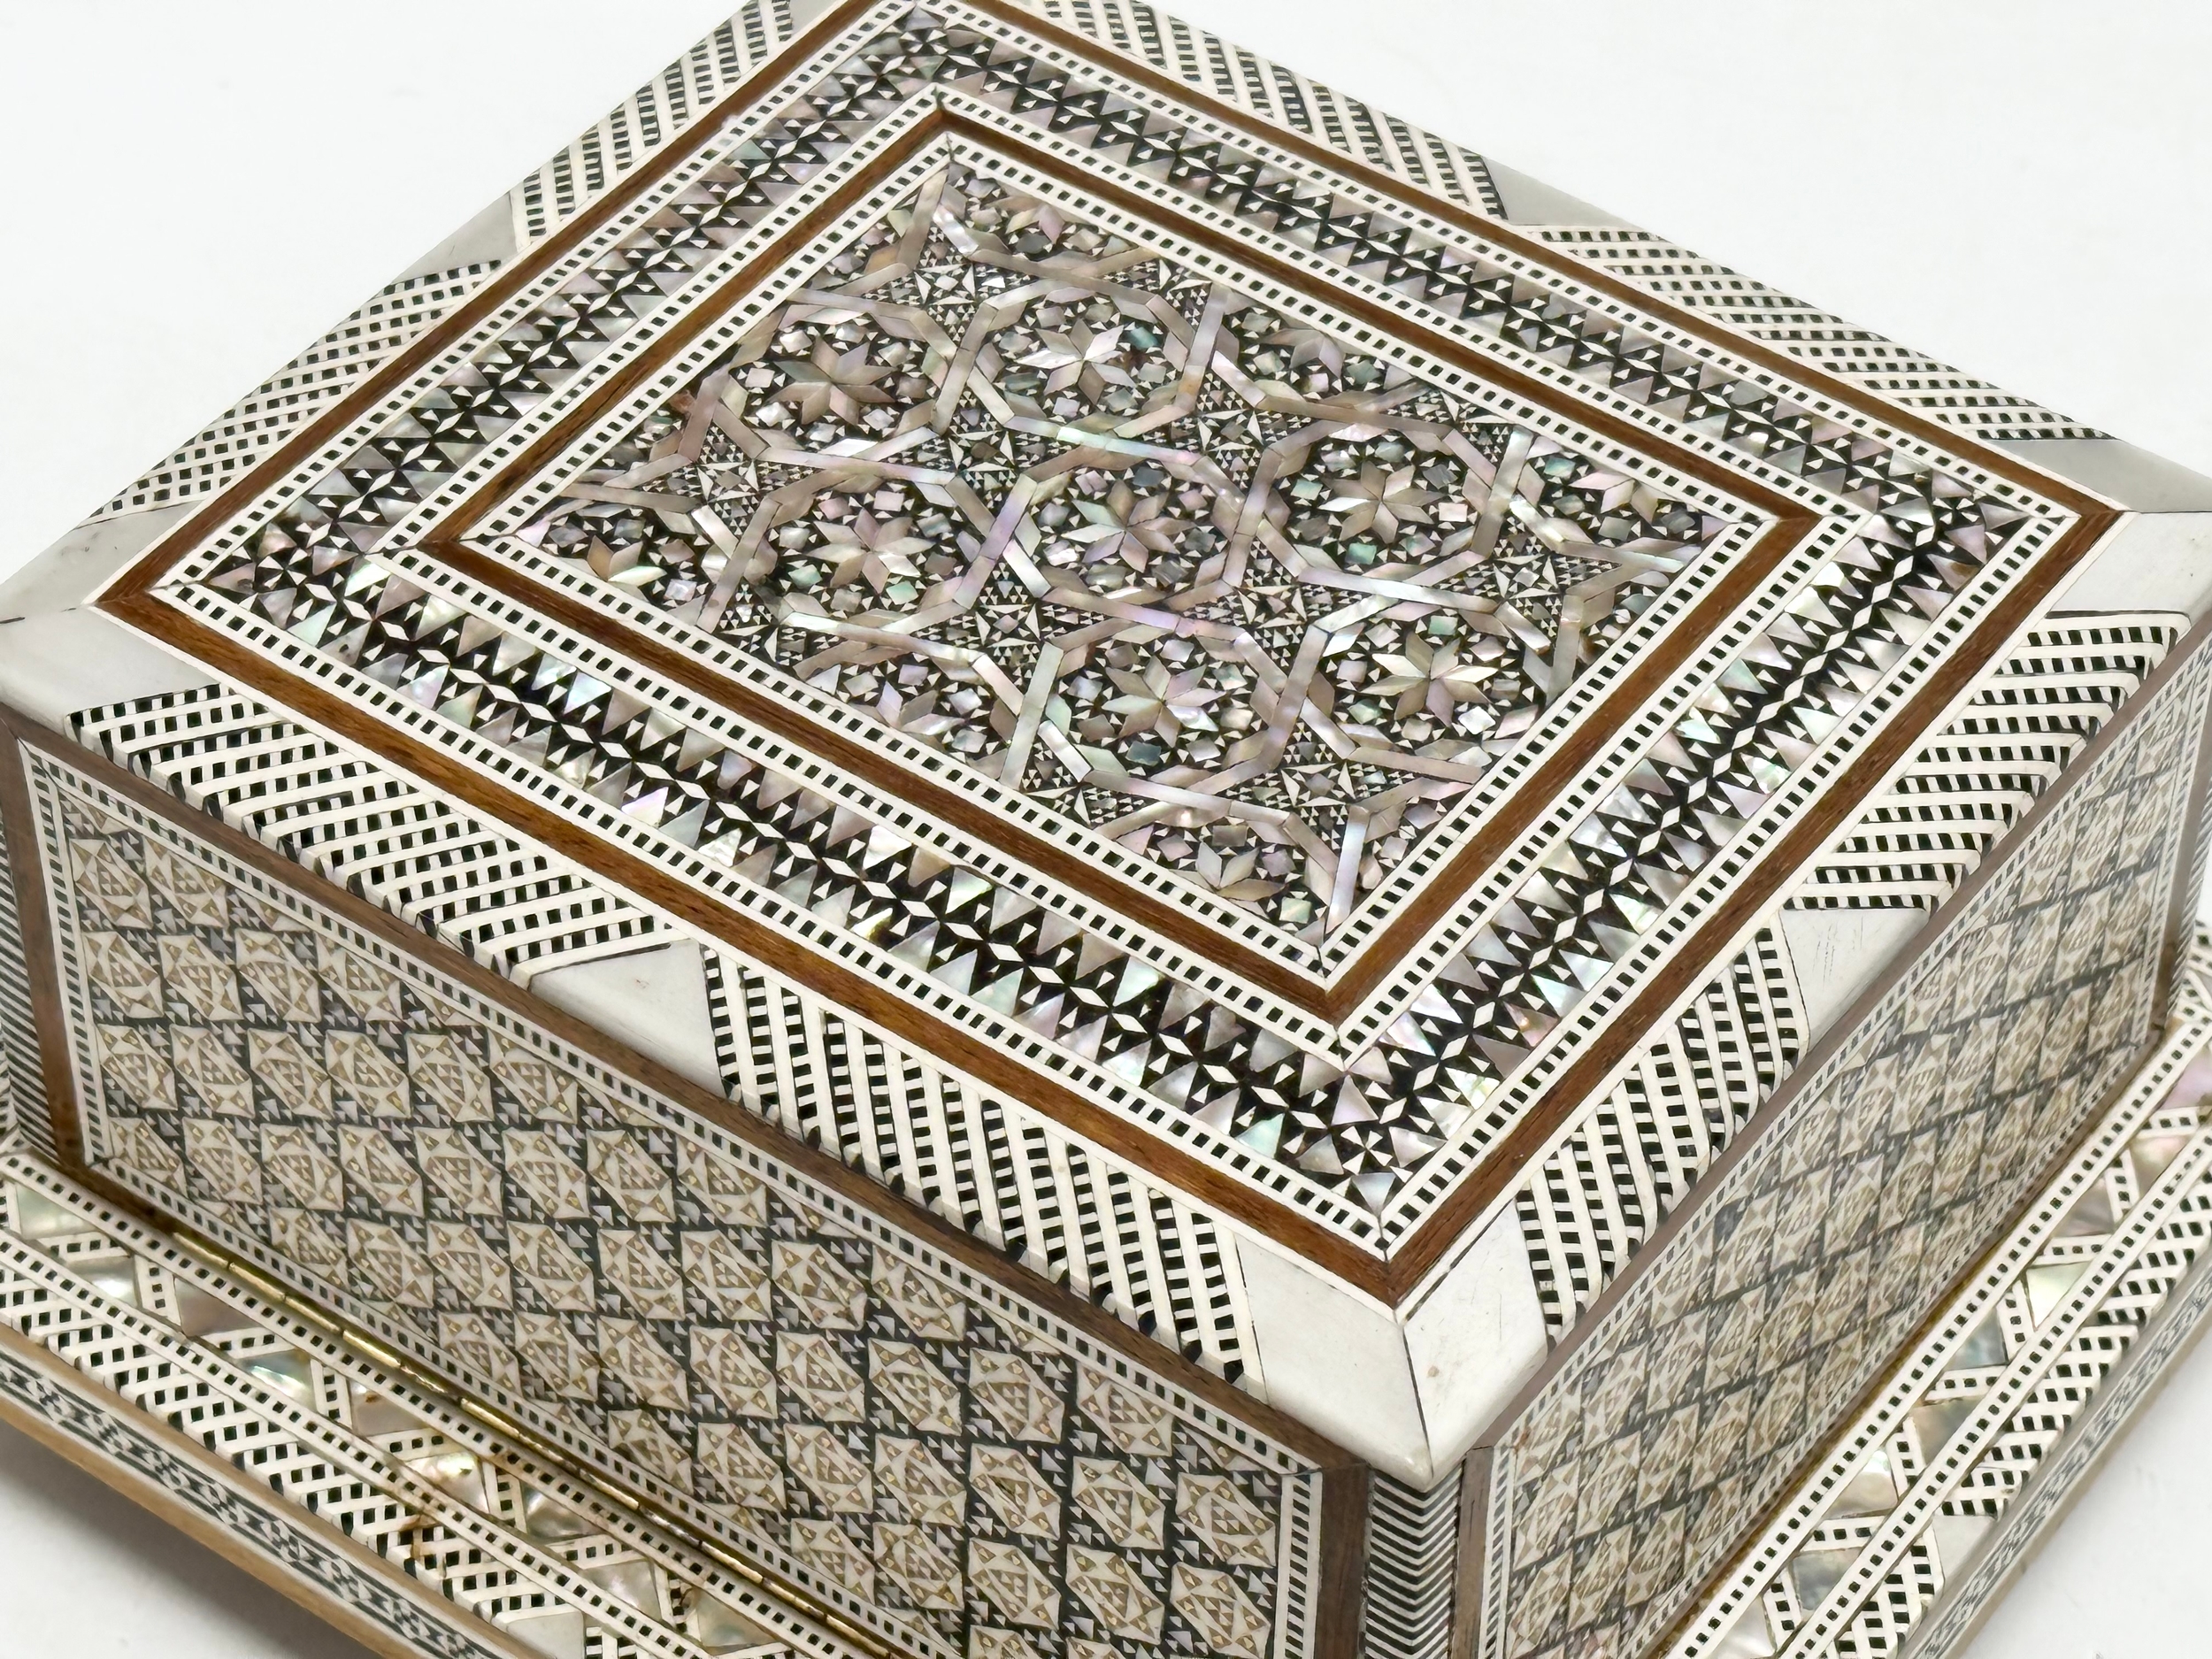 A Mother of Pearl inlaid musical cigarette box. 19x17x11cm - Image 4 of 5